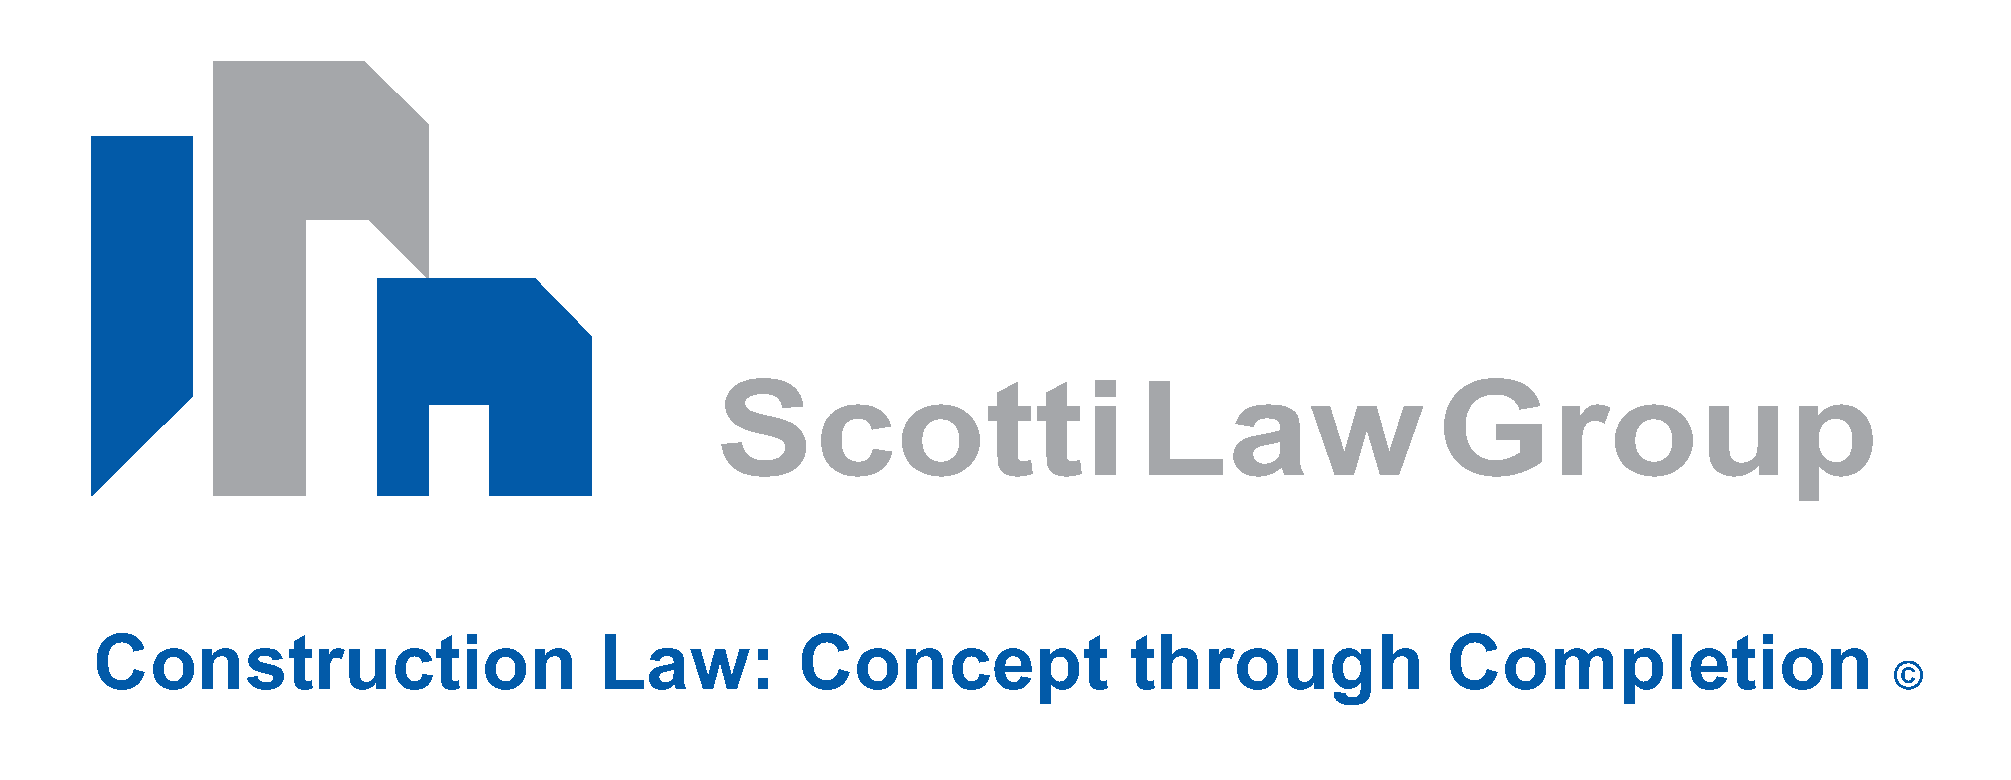 Scotti Law Group logo_complete.png